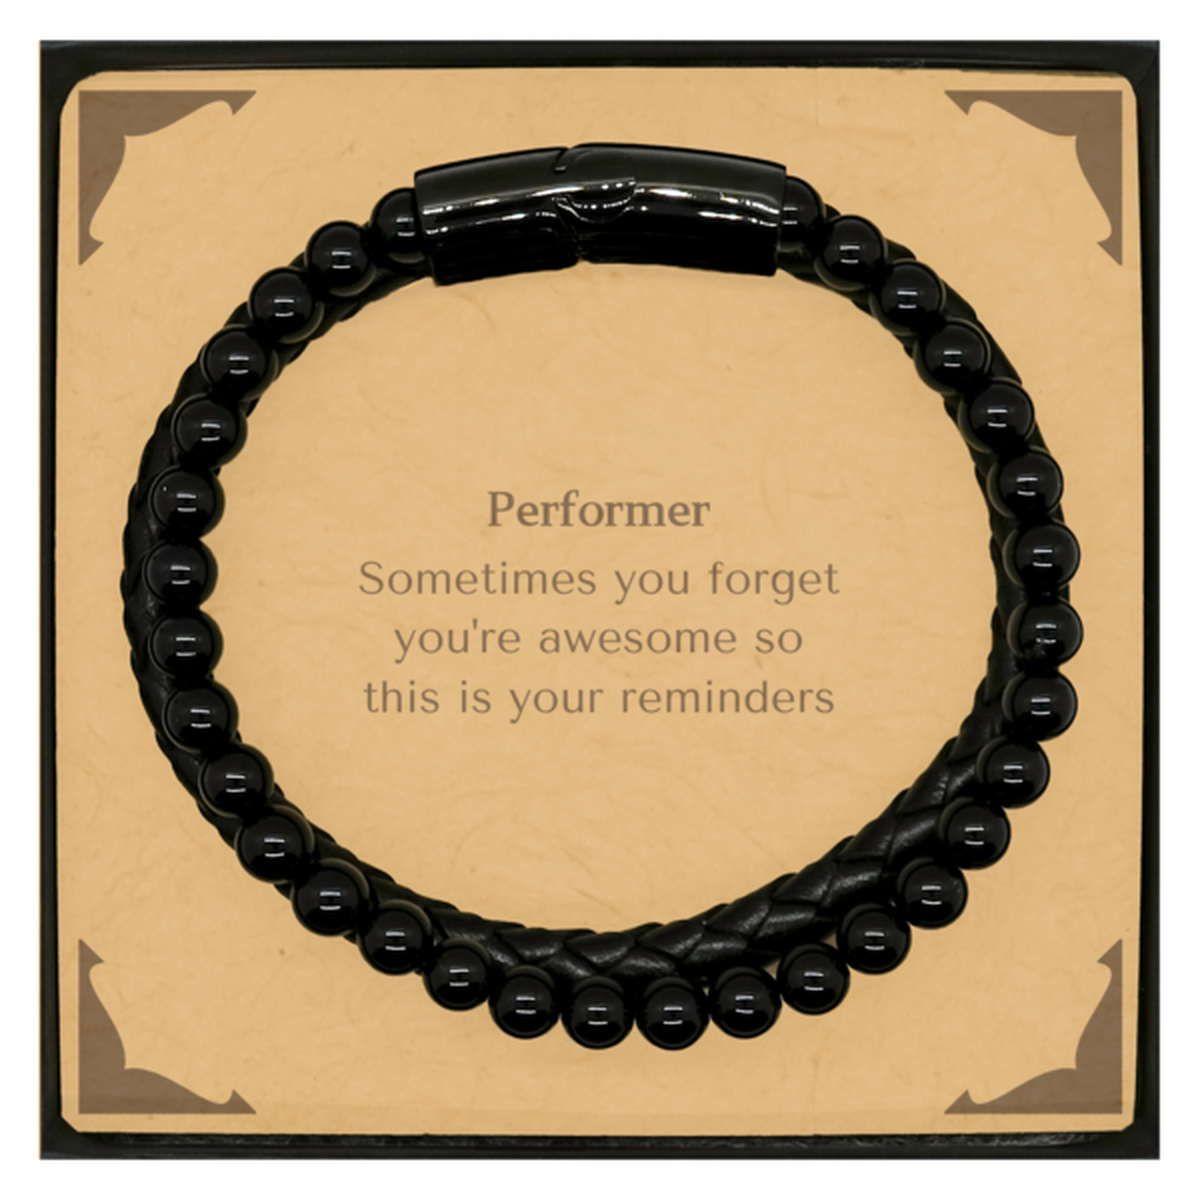 Sentimental Performer Stone Leather Bracelets, Performer Sometimes you forget you're awesome so this is your reminders, Graduation Christmas Birthday Gifts for Performer, Men, Women, Coworkers